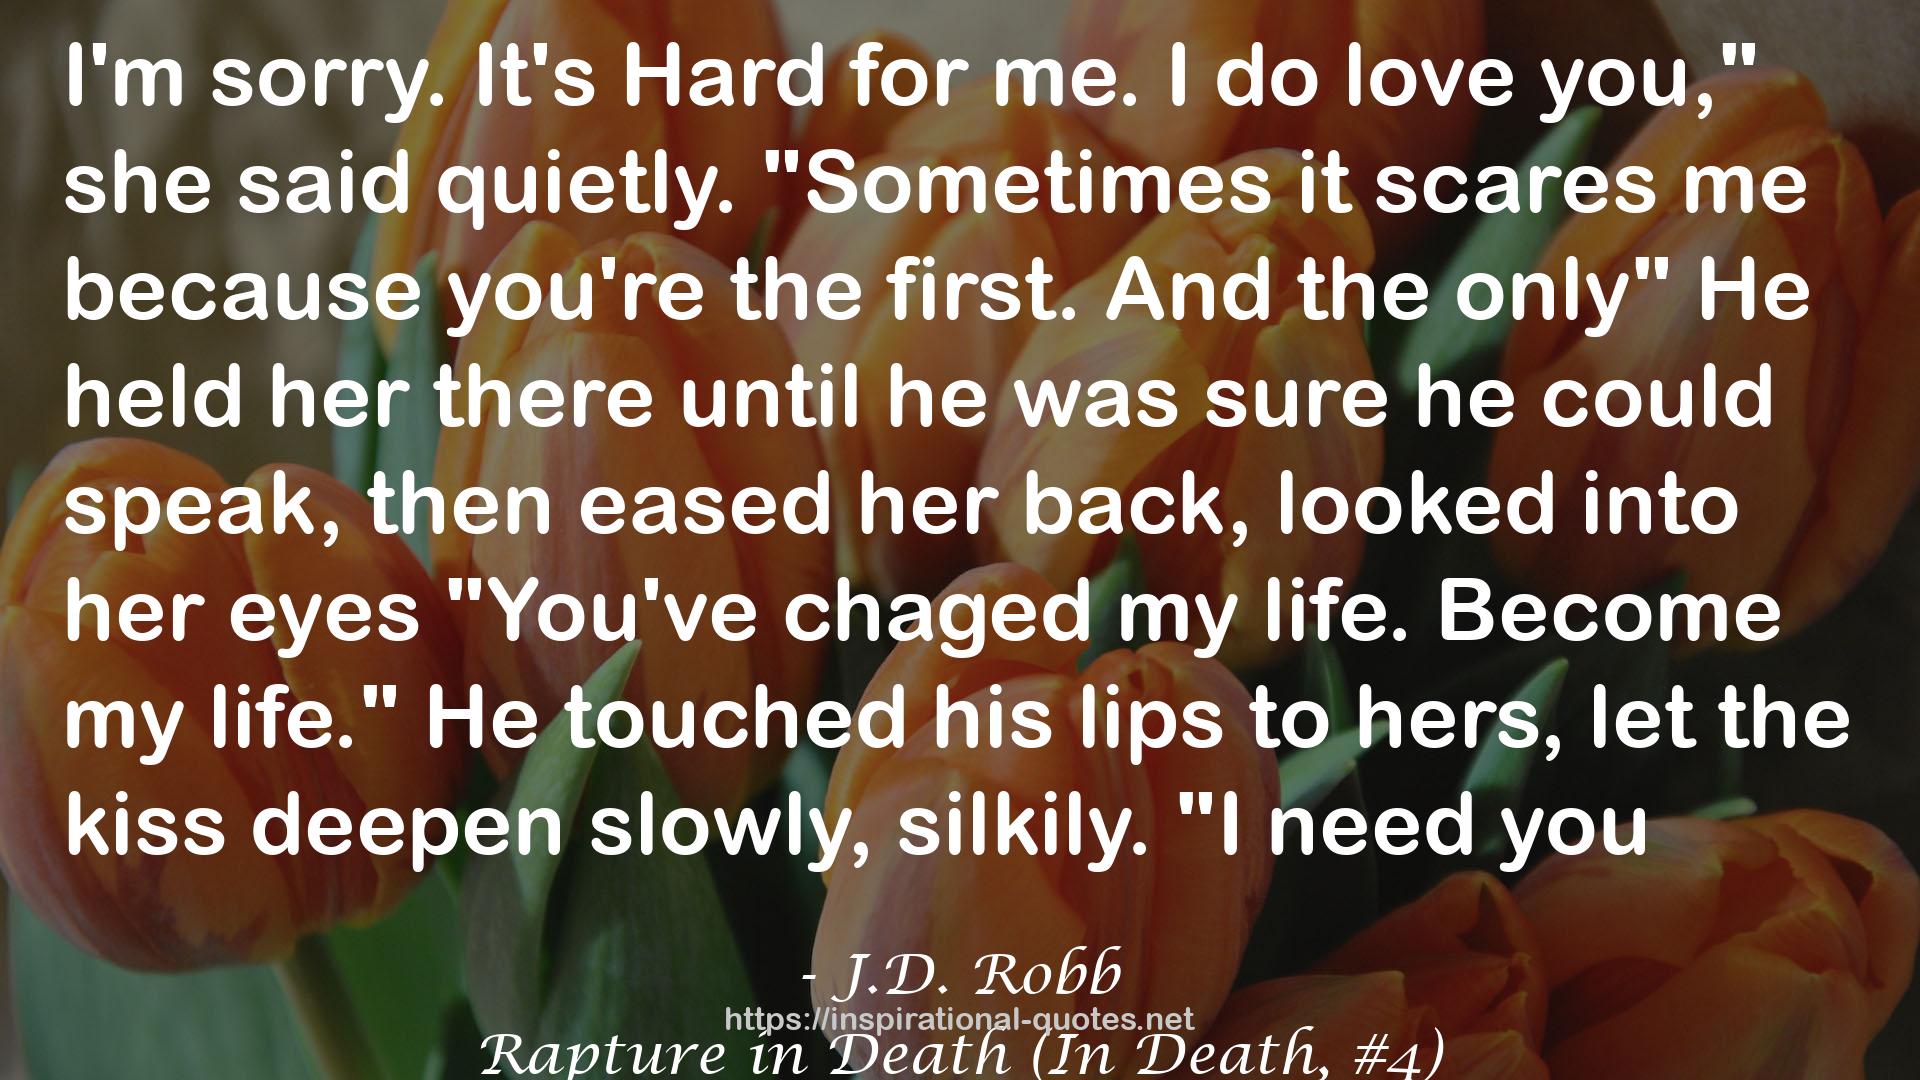 Rapture in Death (In Death, #4) QUOTES